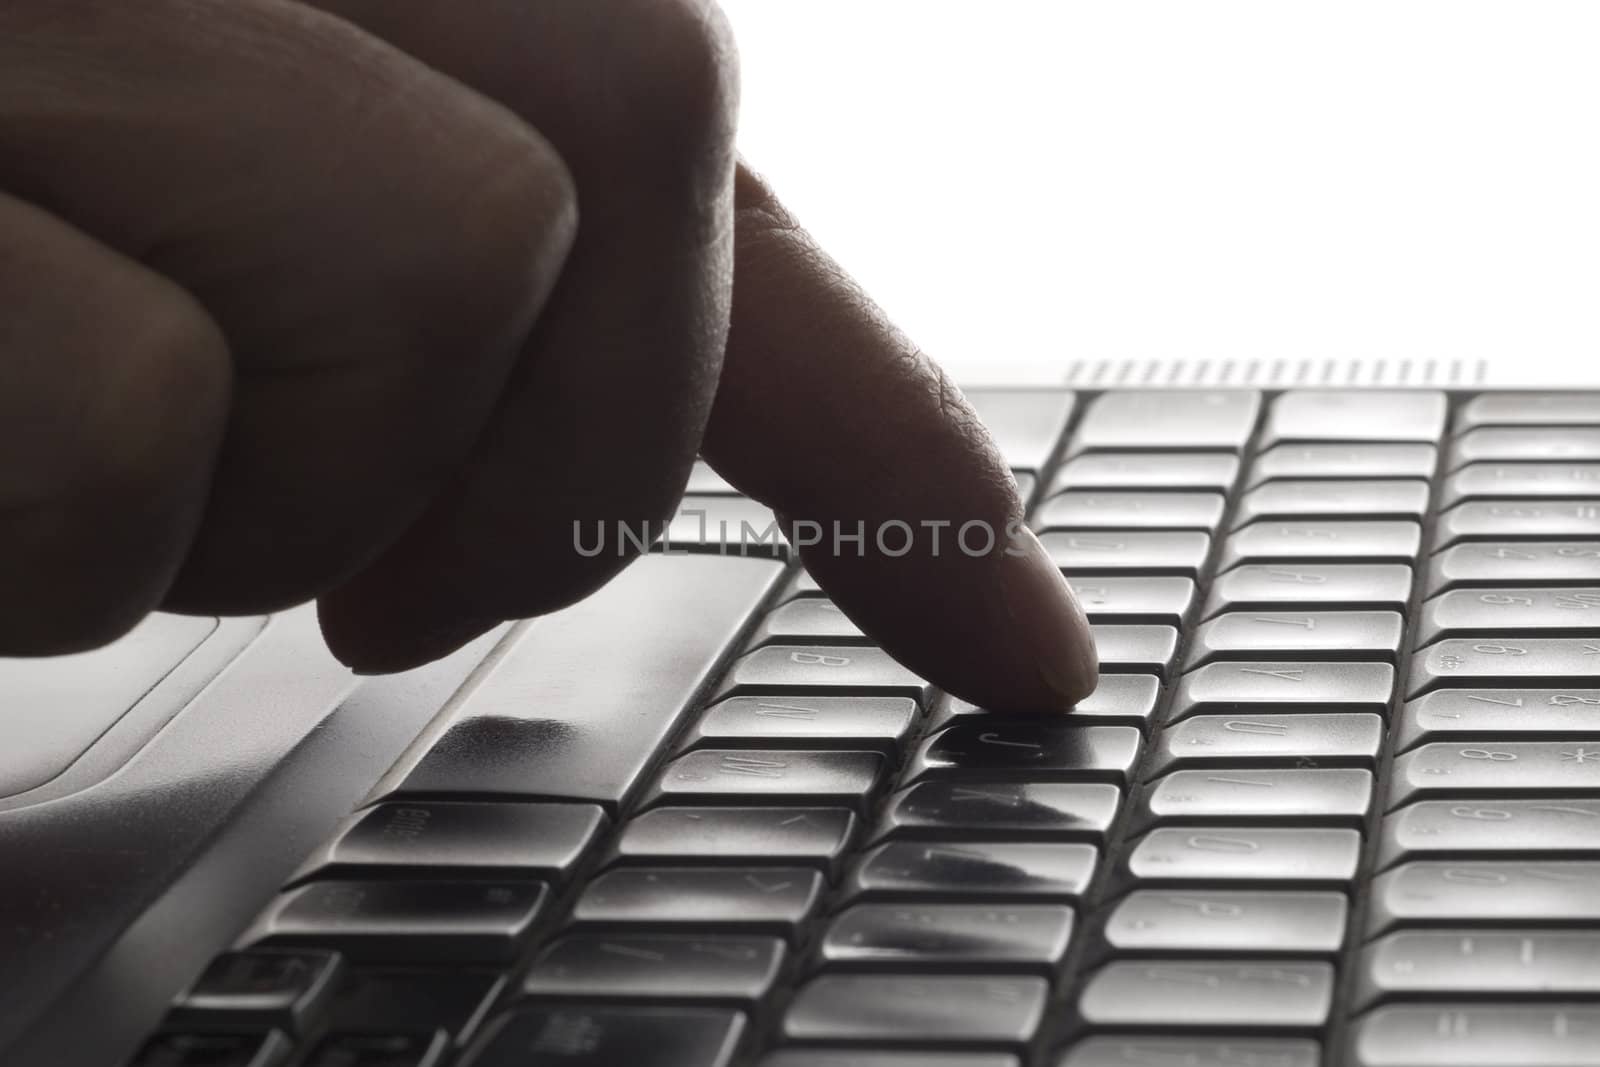 Selective focus on the index finger hitting the keyboard of a laptop.